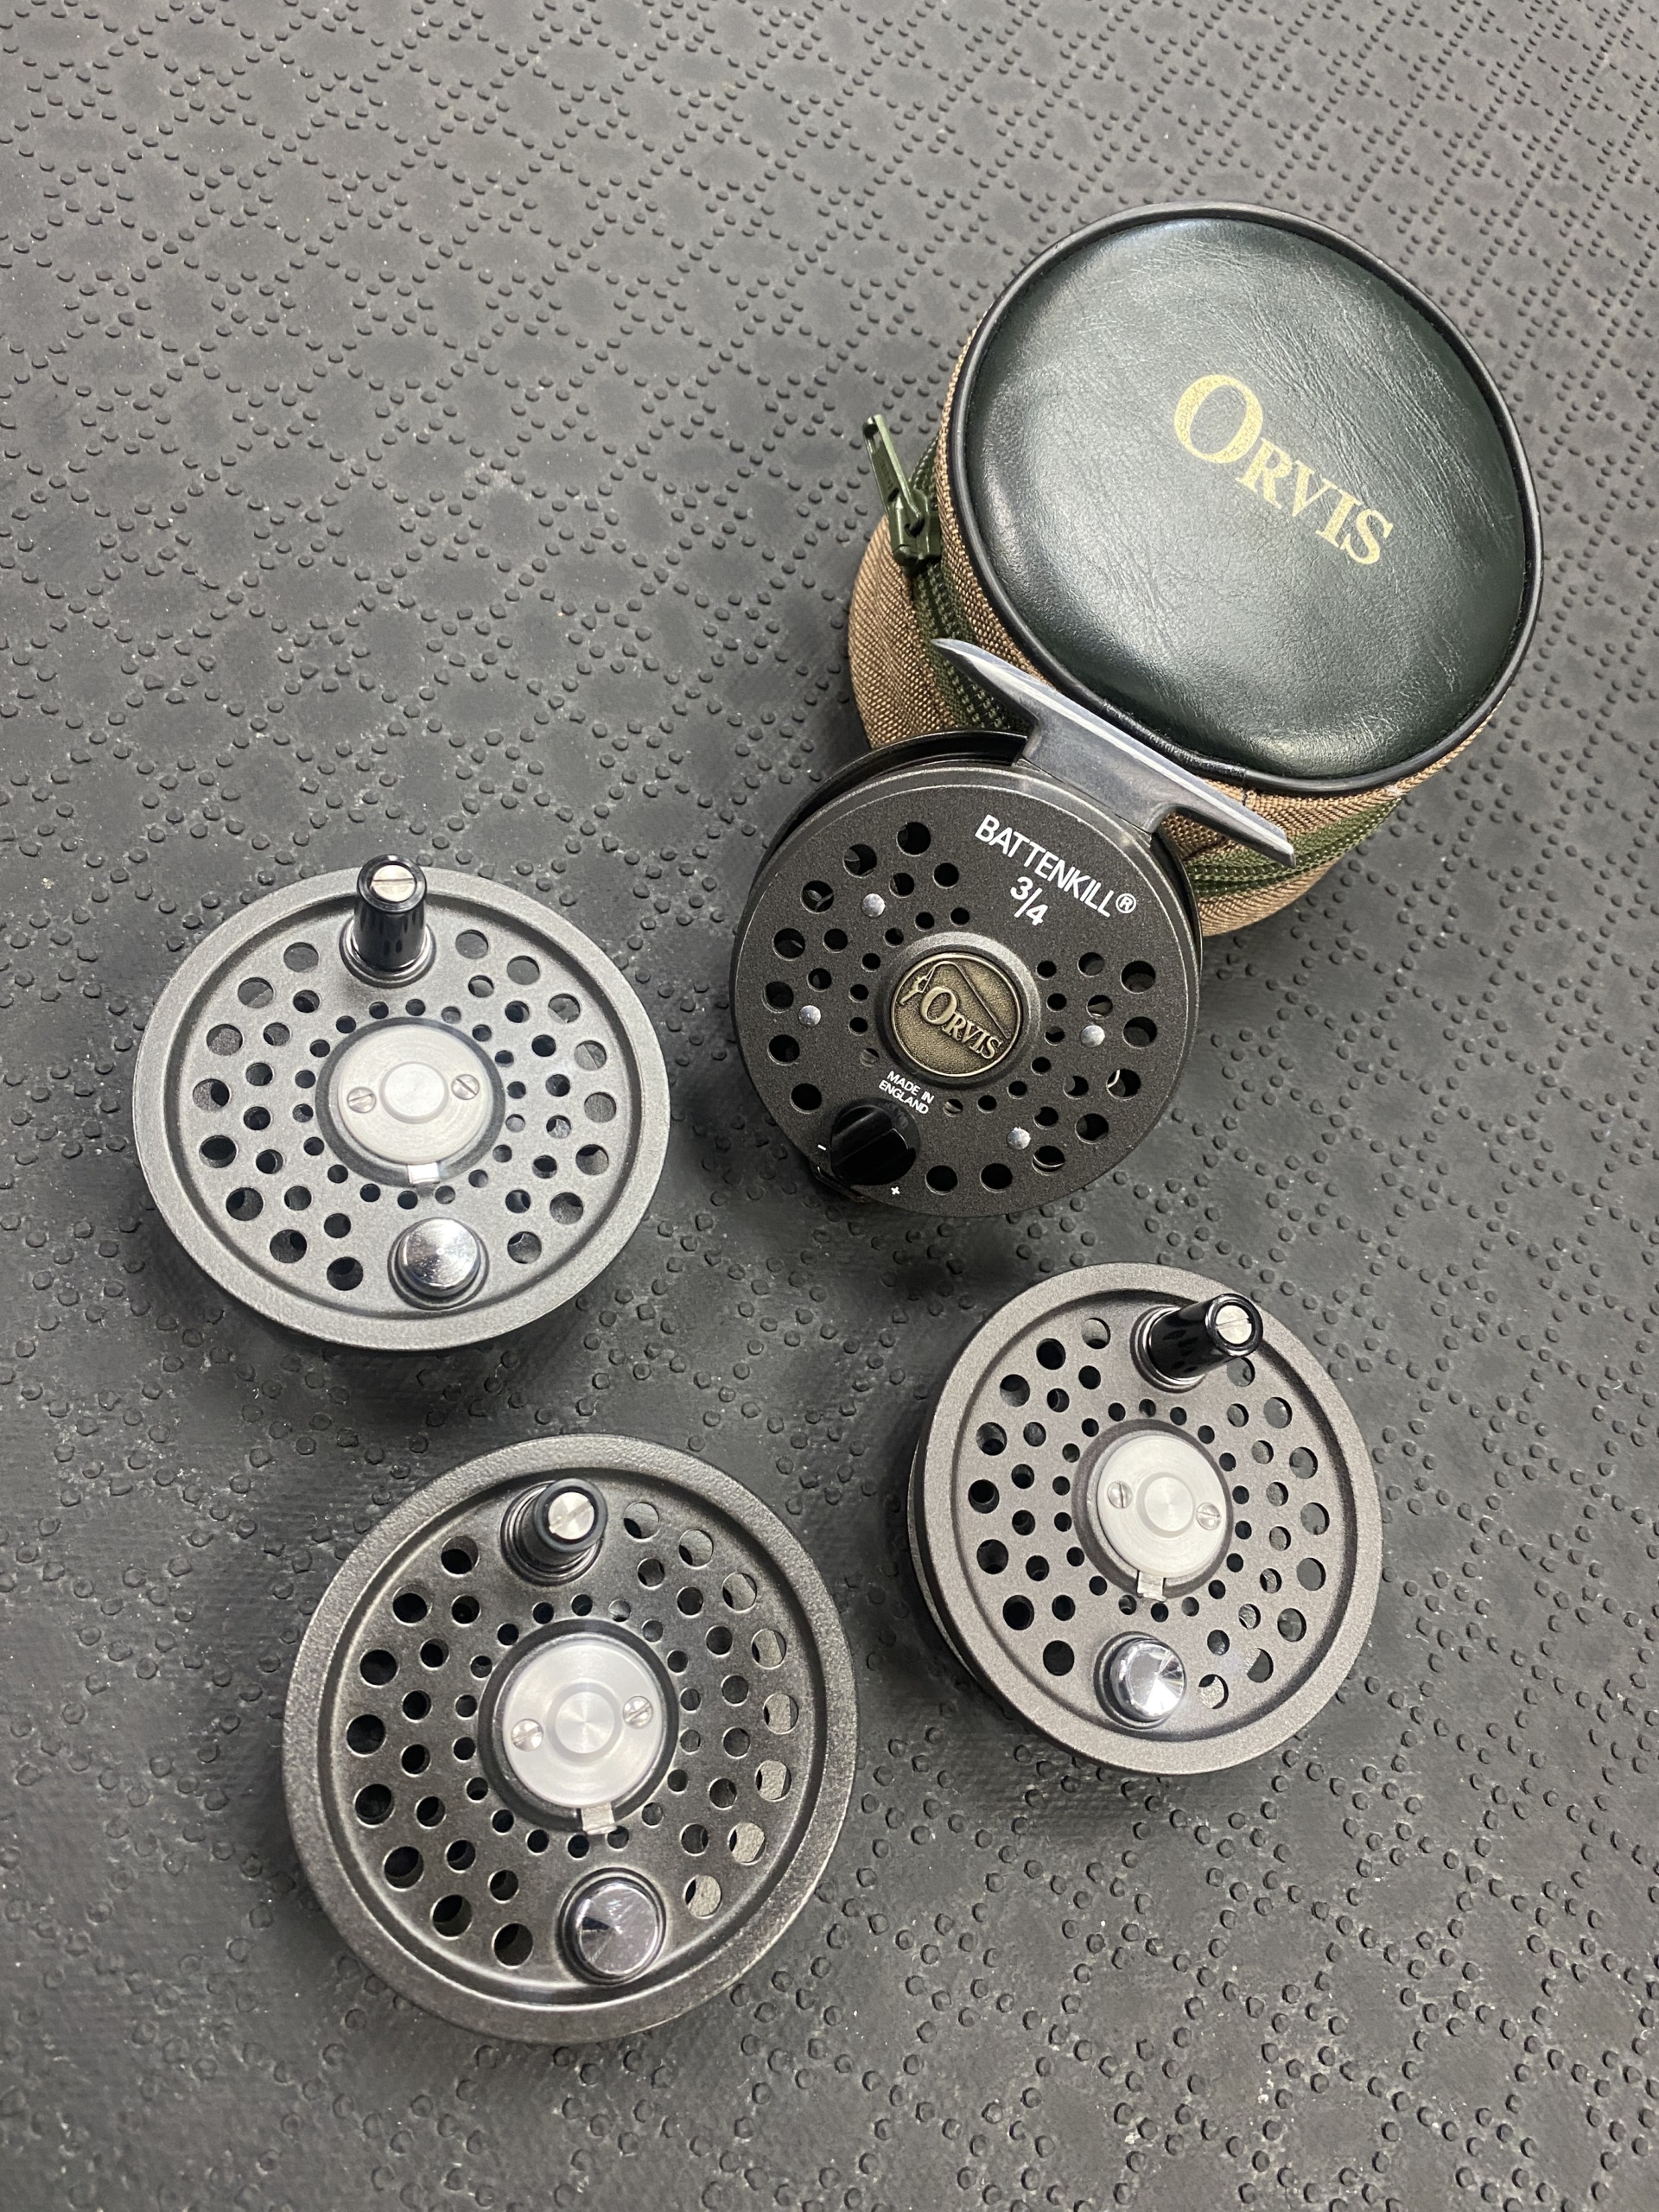 https://thefirstcast.ca/wp-content/uploads/2021/08/Orvis-Battenkill-34-Made-in-England-Fly-Reel-and-3-Spare-Spools-A-scaled.jpg